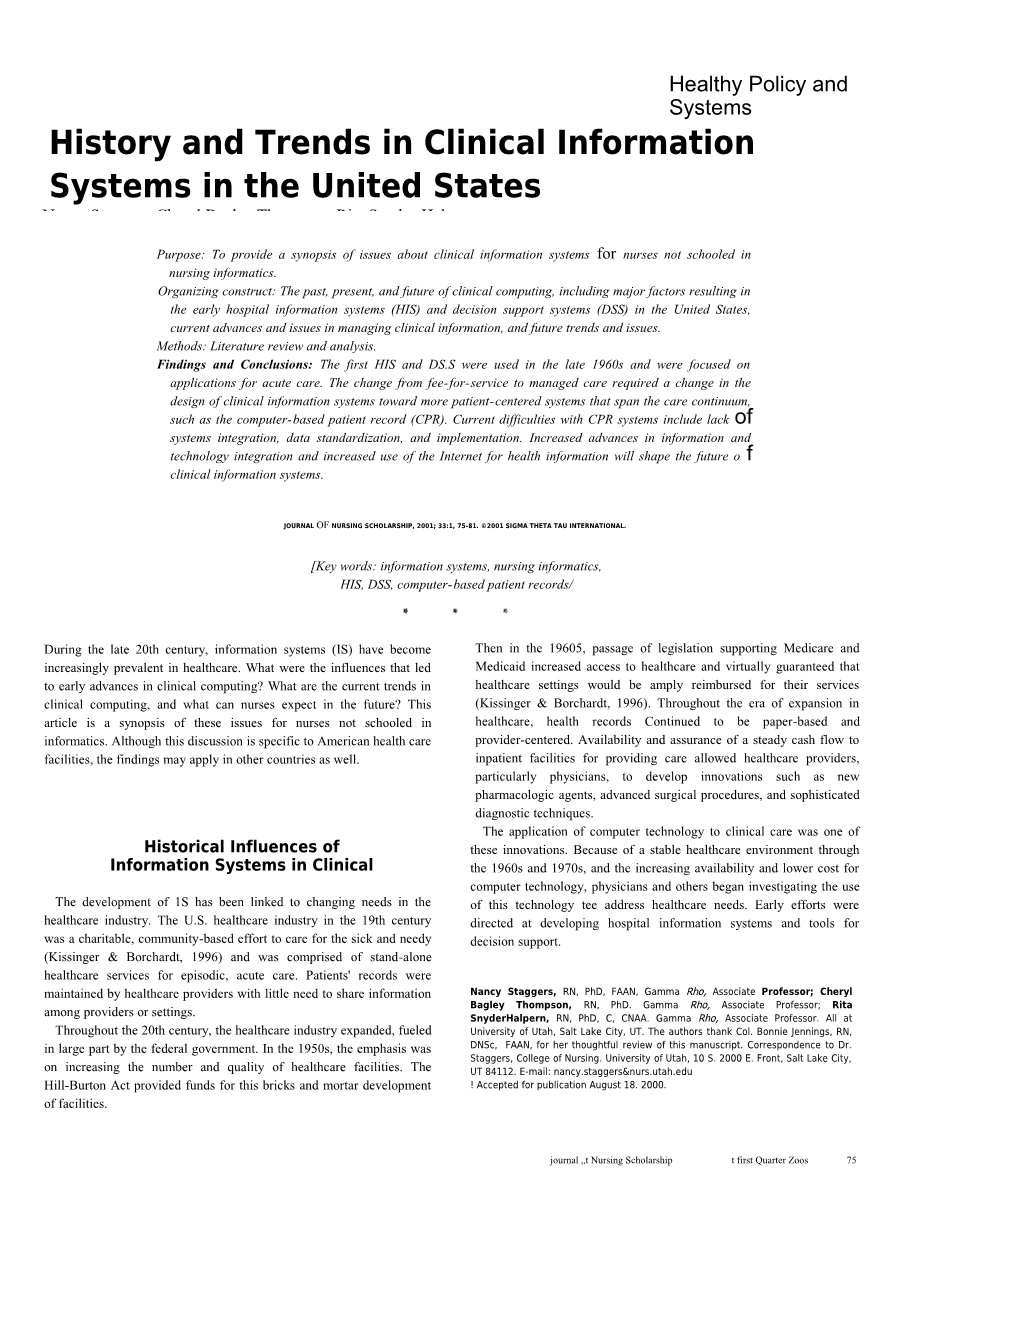 History and Trends in Clinical Information Systems in the United States